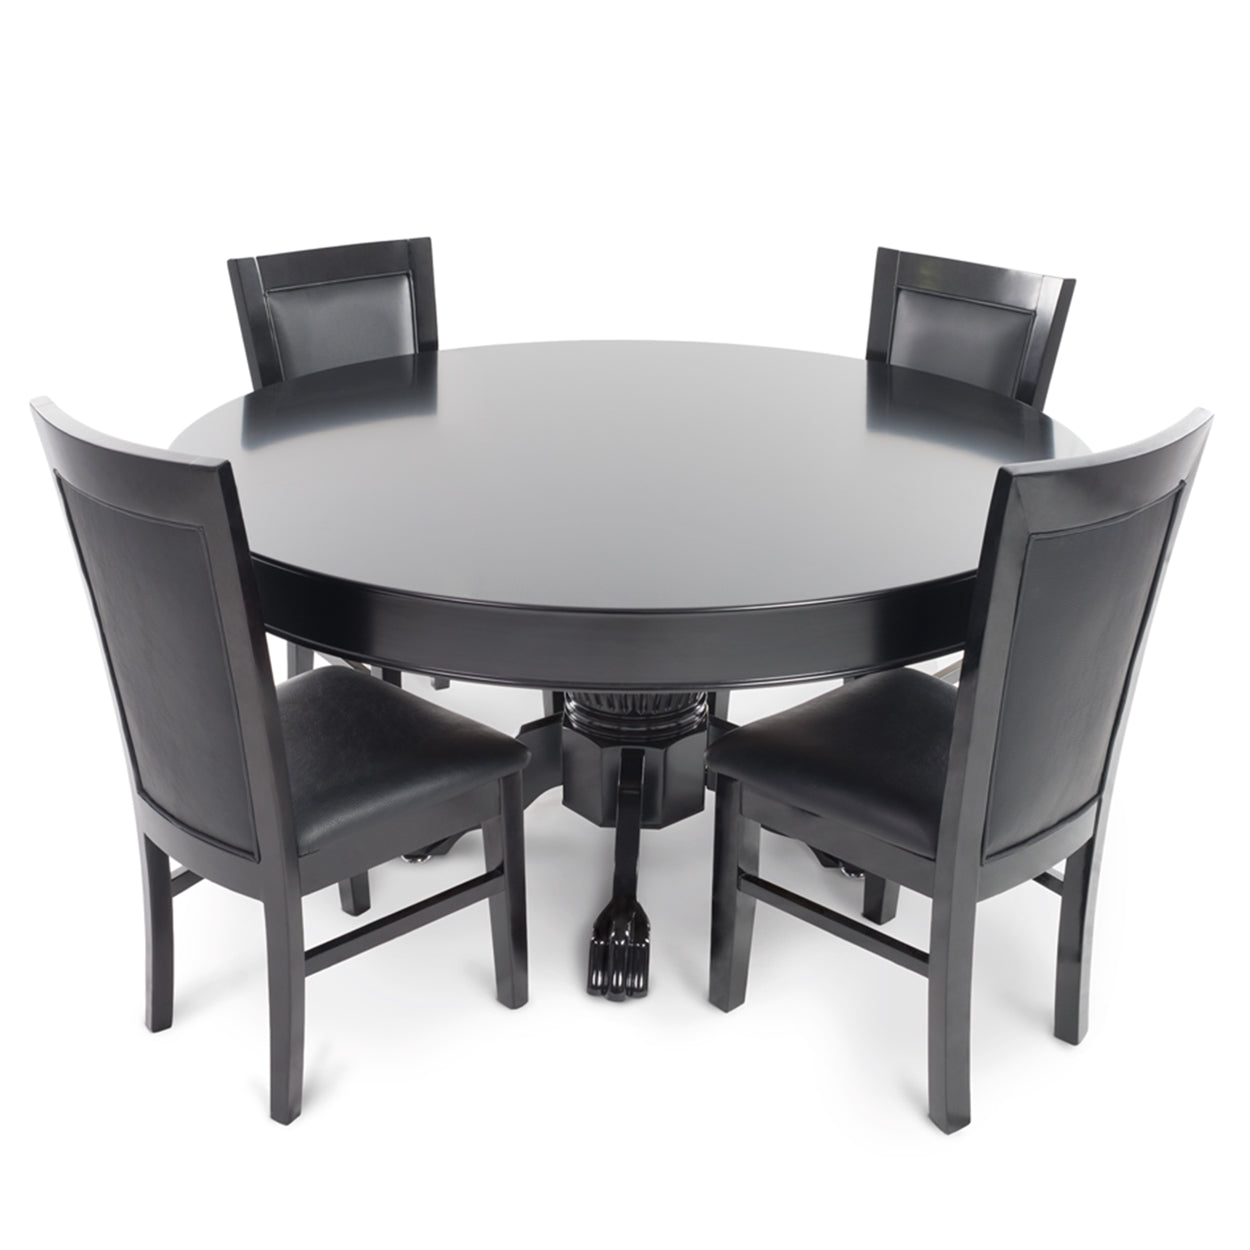 BBO The Nighthawk Poker Table Dining With Chair